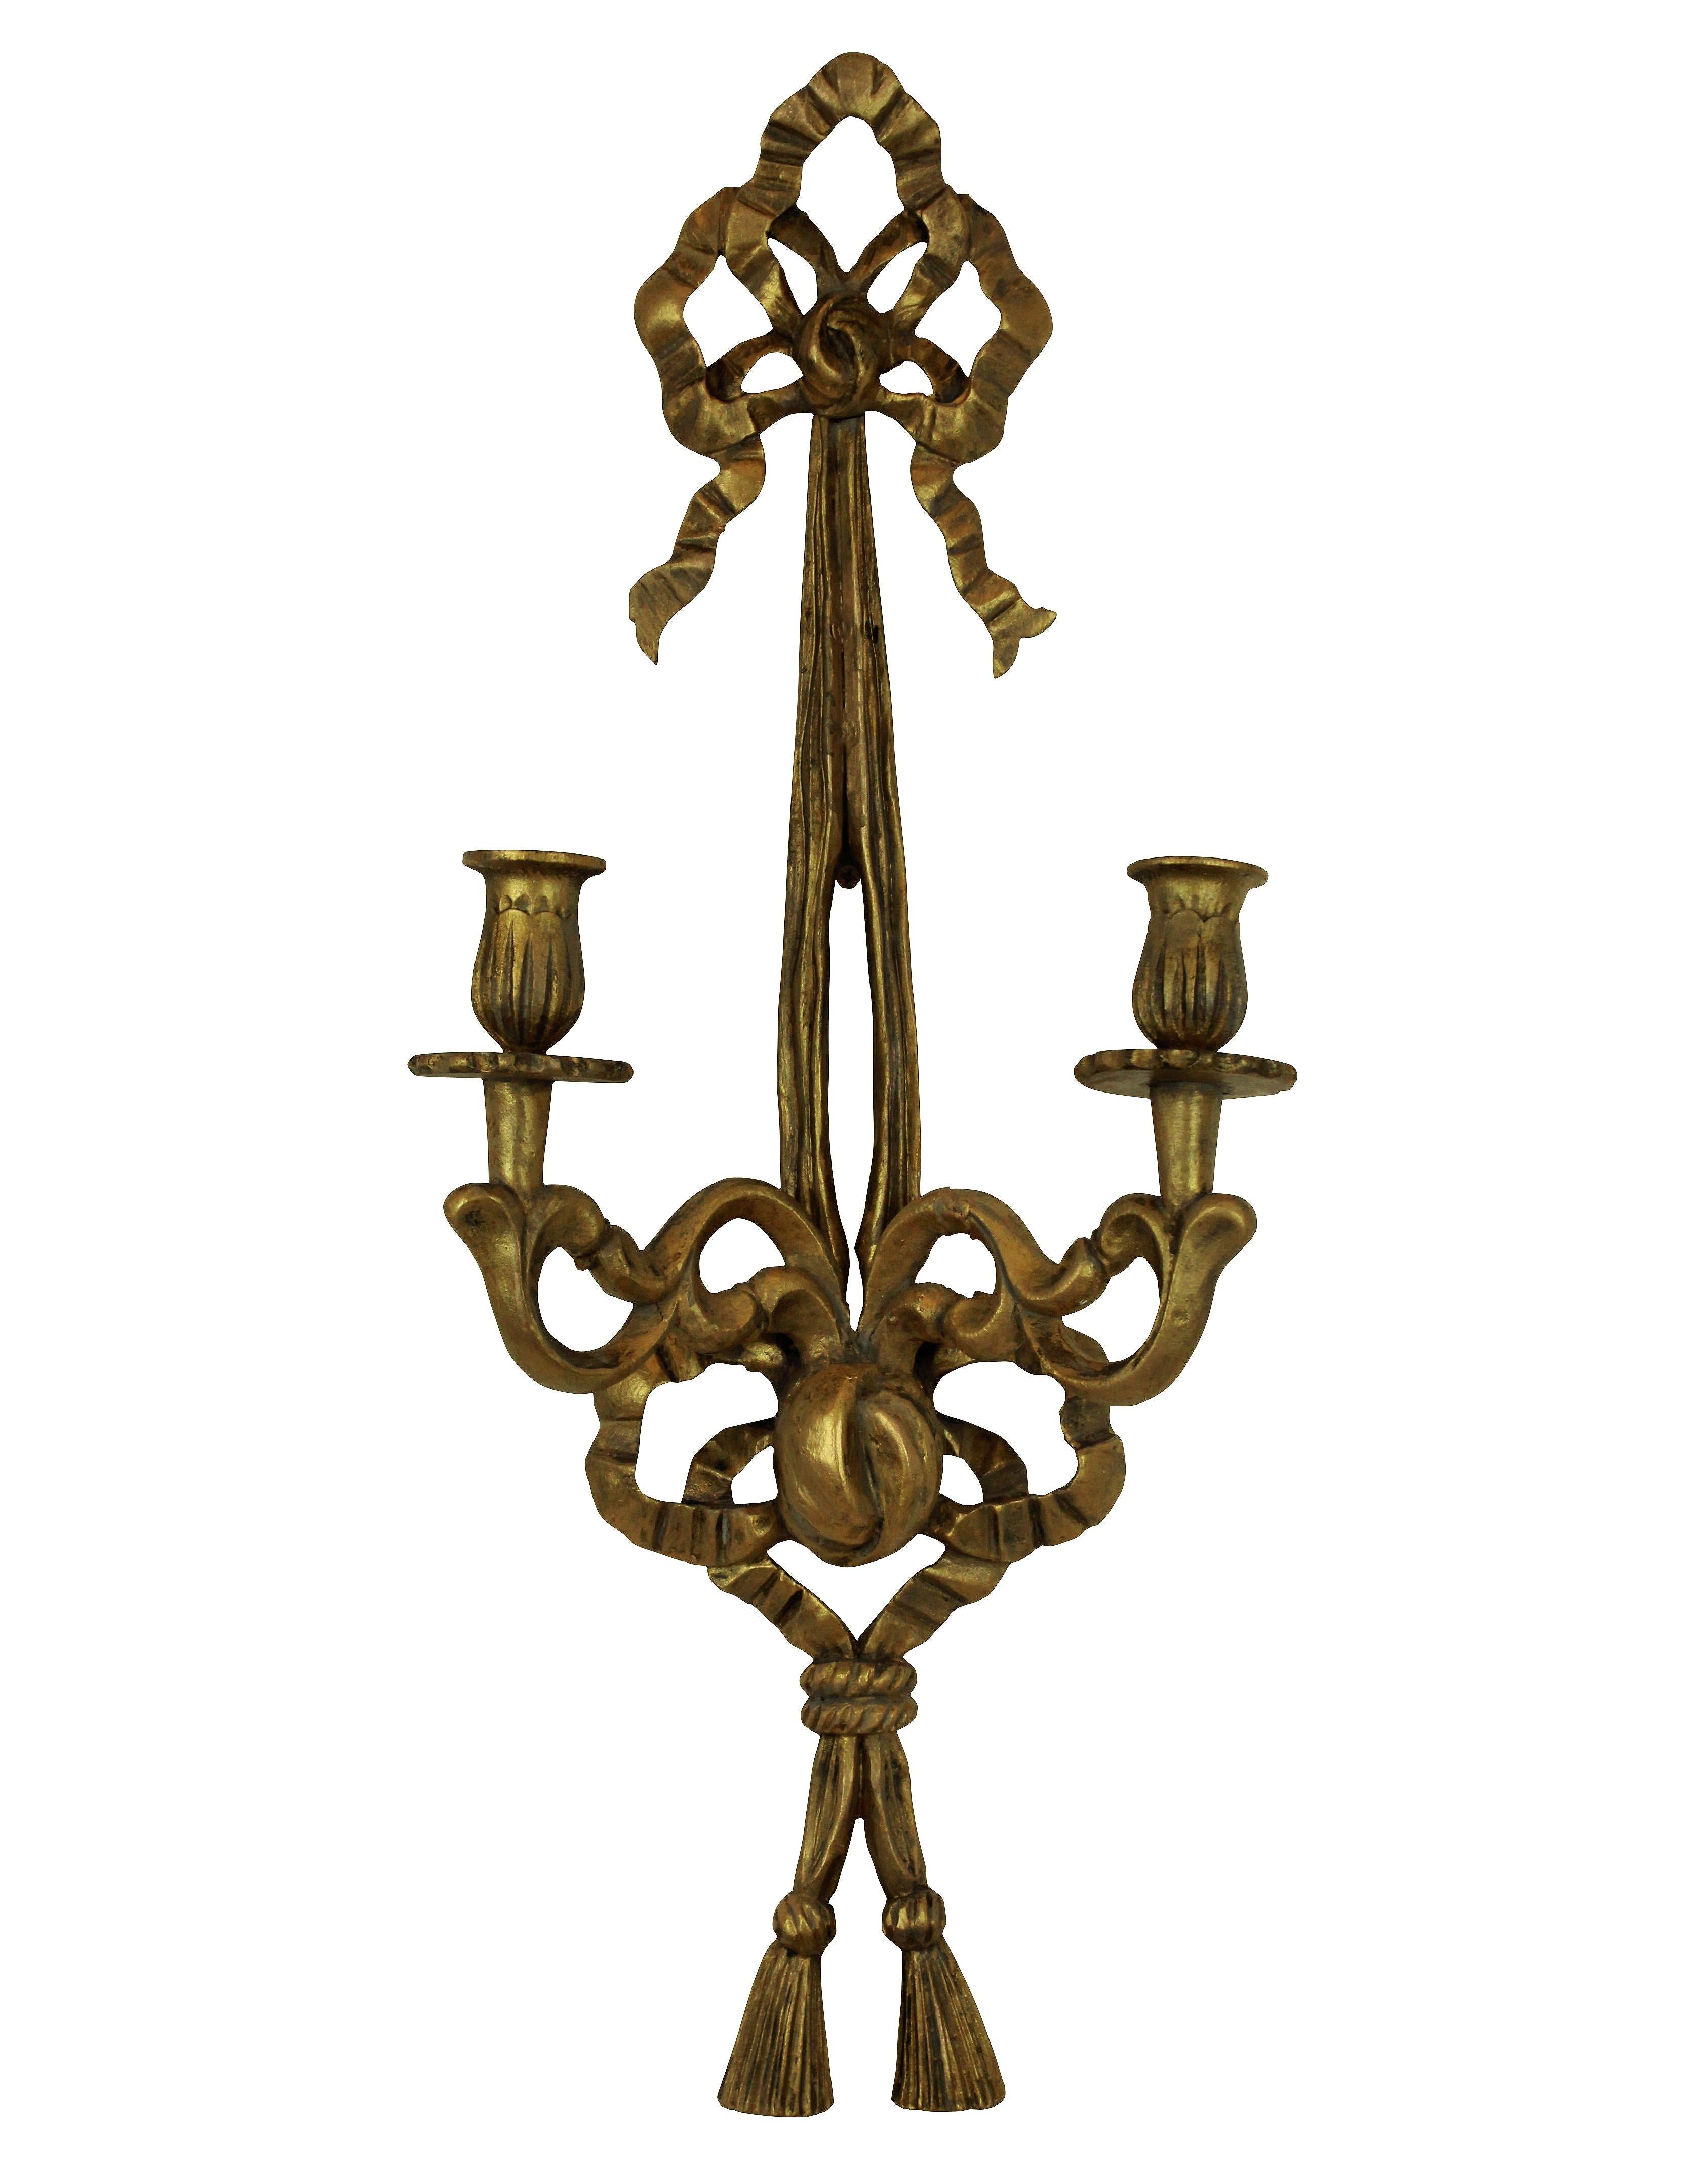 A set of six French carved and gilded wall sconces.